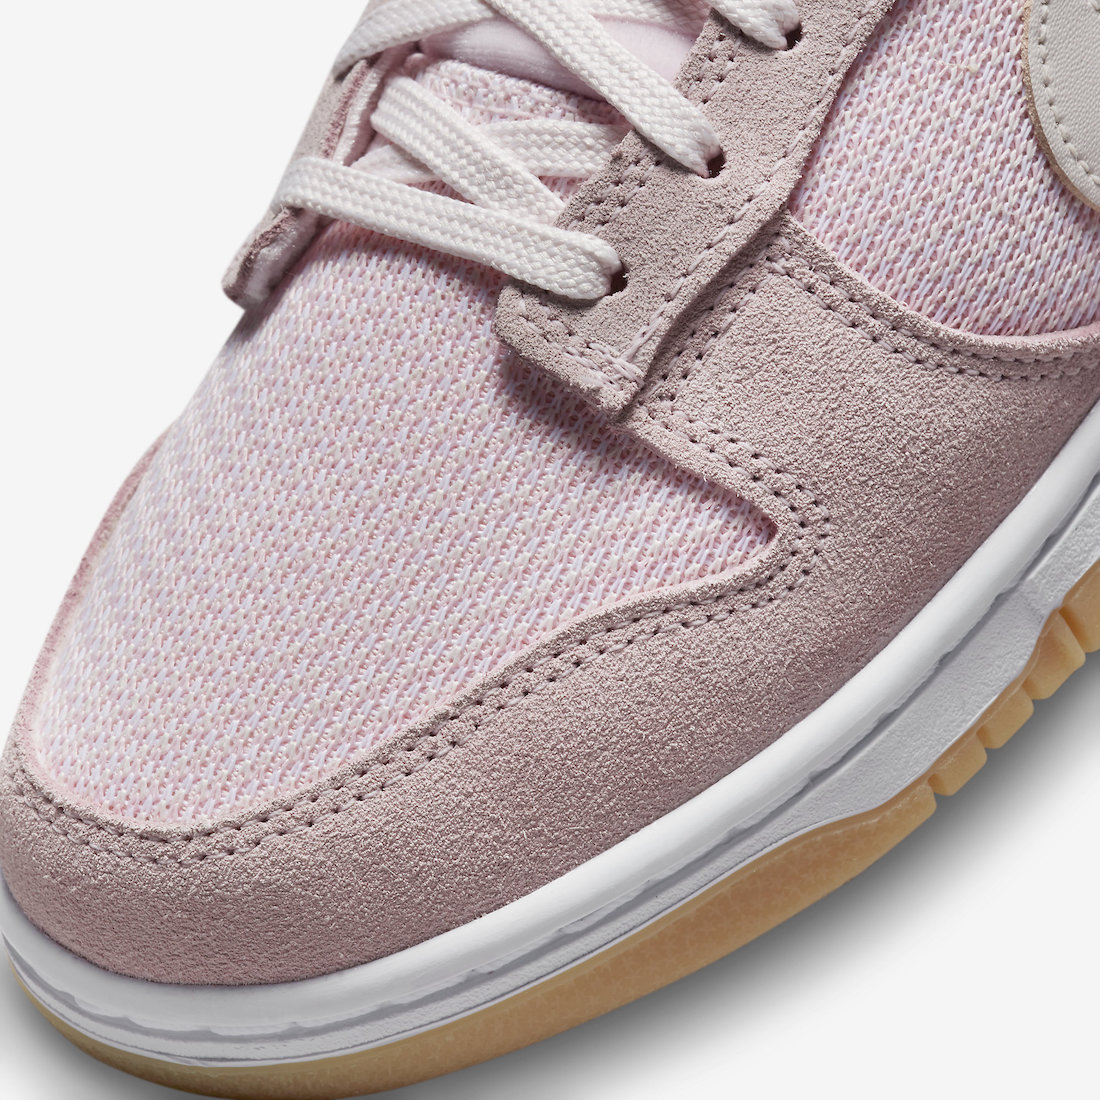 Nike Dunk Low Teddy Bear Pink DZ5318-640 Release Date + Where to Buy ...